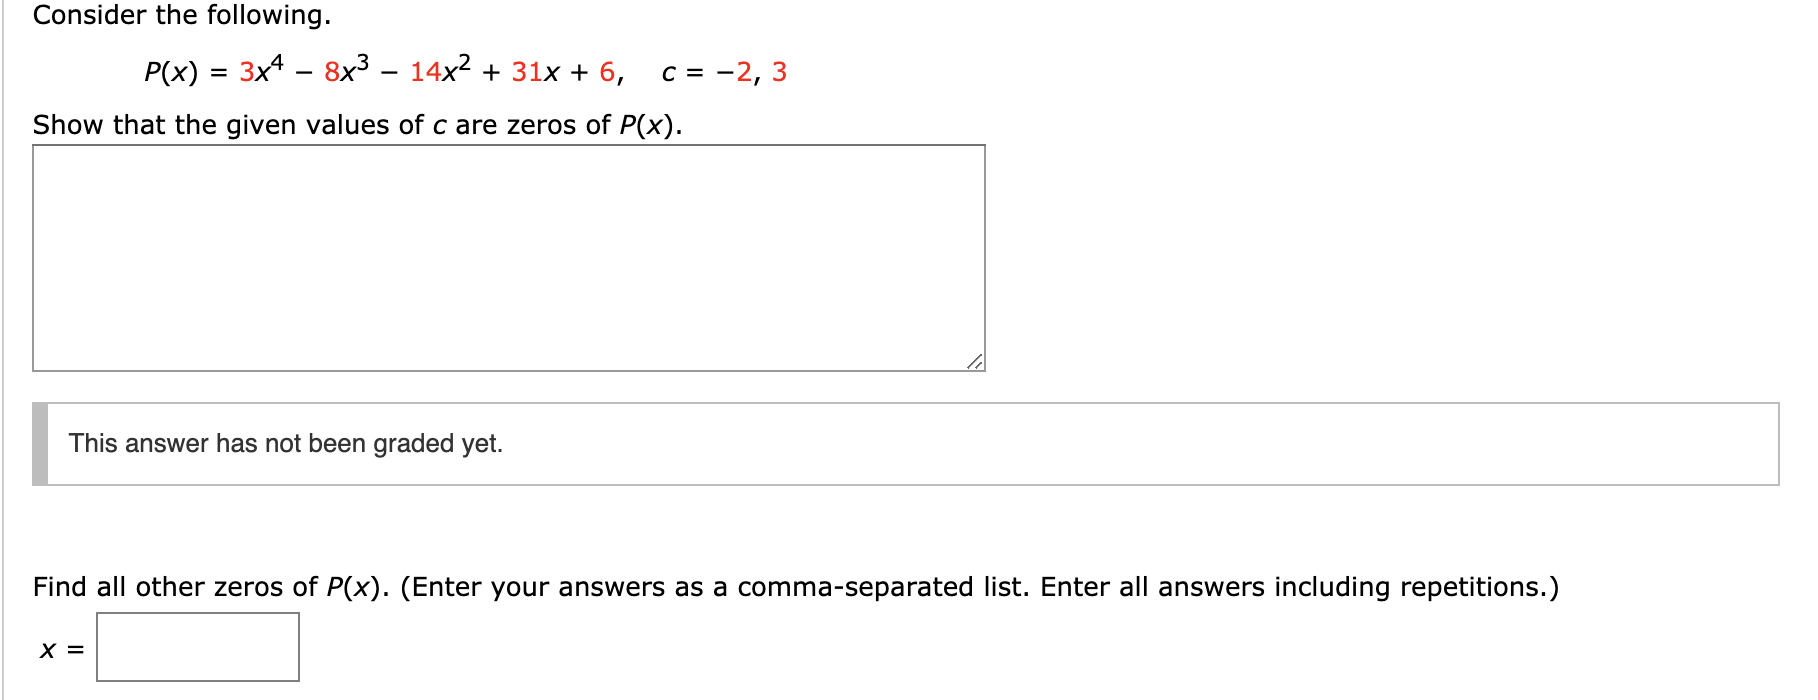 Consider the following
3x4 - 8x3 - 14x2 31x + 6,
Р(x)
3
c -2,
Show that the given values of c are zeros of P(x).
This answer has not been graded yet.
Find all other zeros of P(x). (Enter your answers as a comma-separated list. Enter all answers including repetitions.)
х 3
